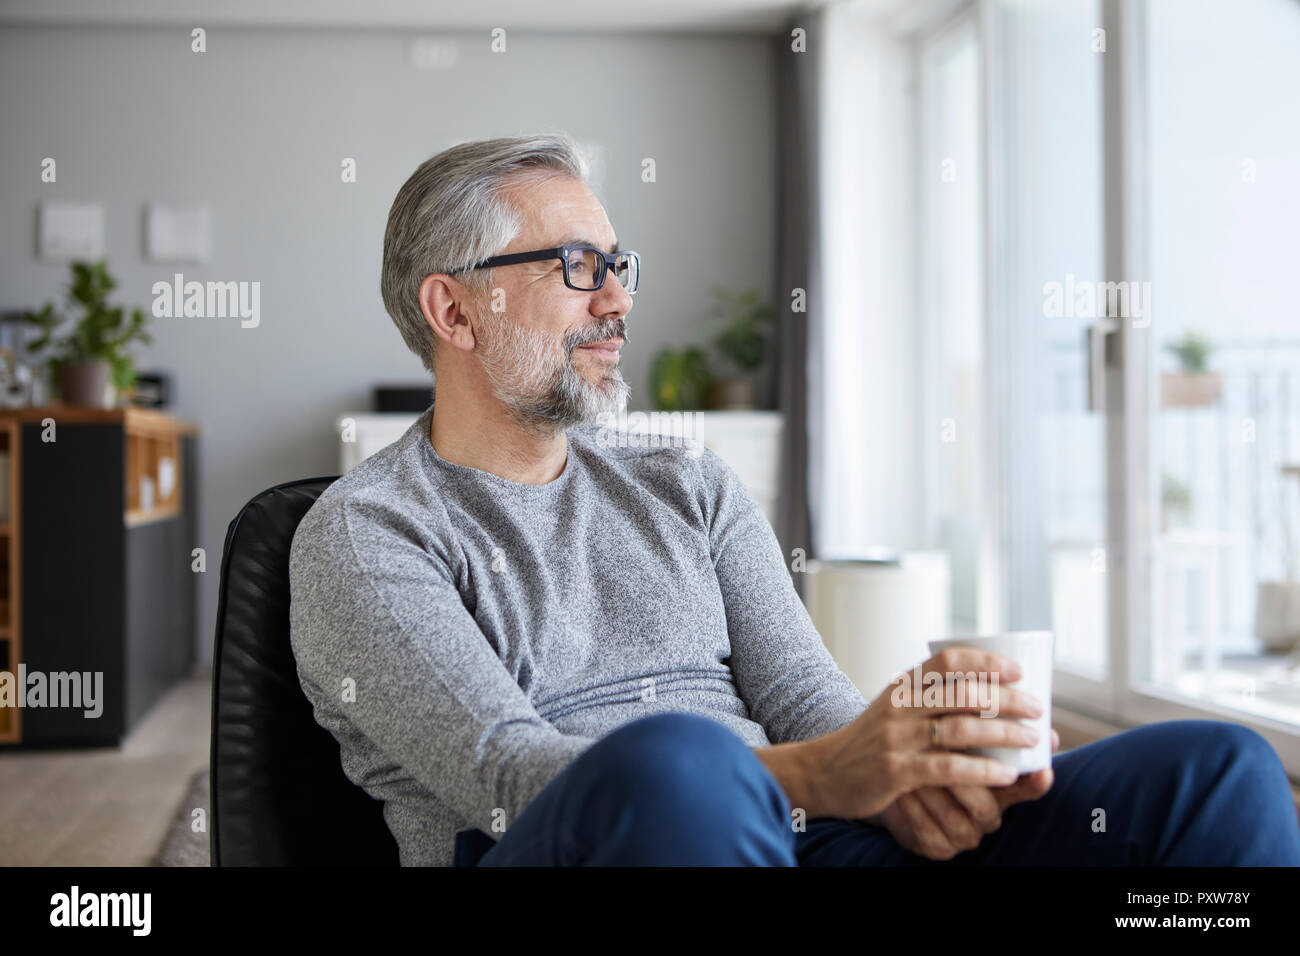 Content mature man relaxing with cup of coffee at home Stock Photo